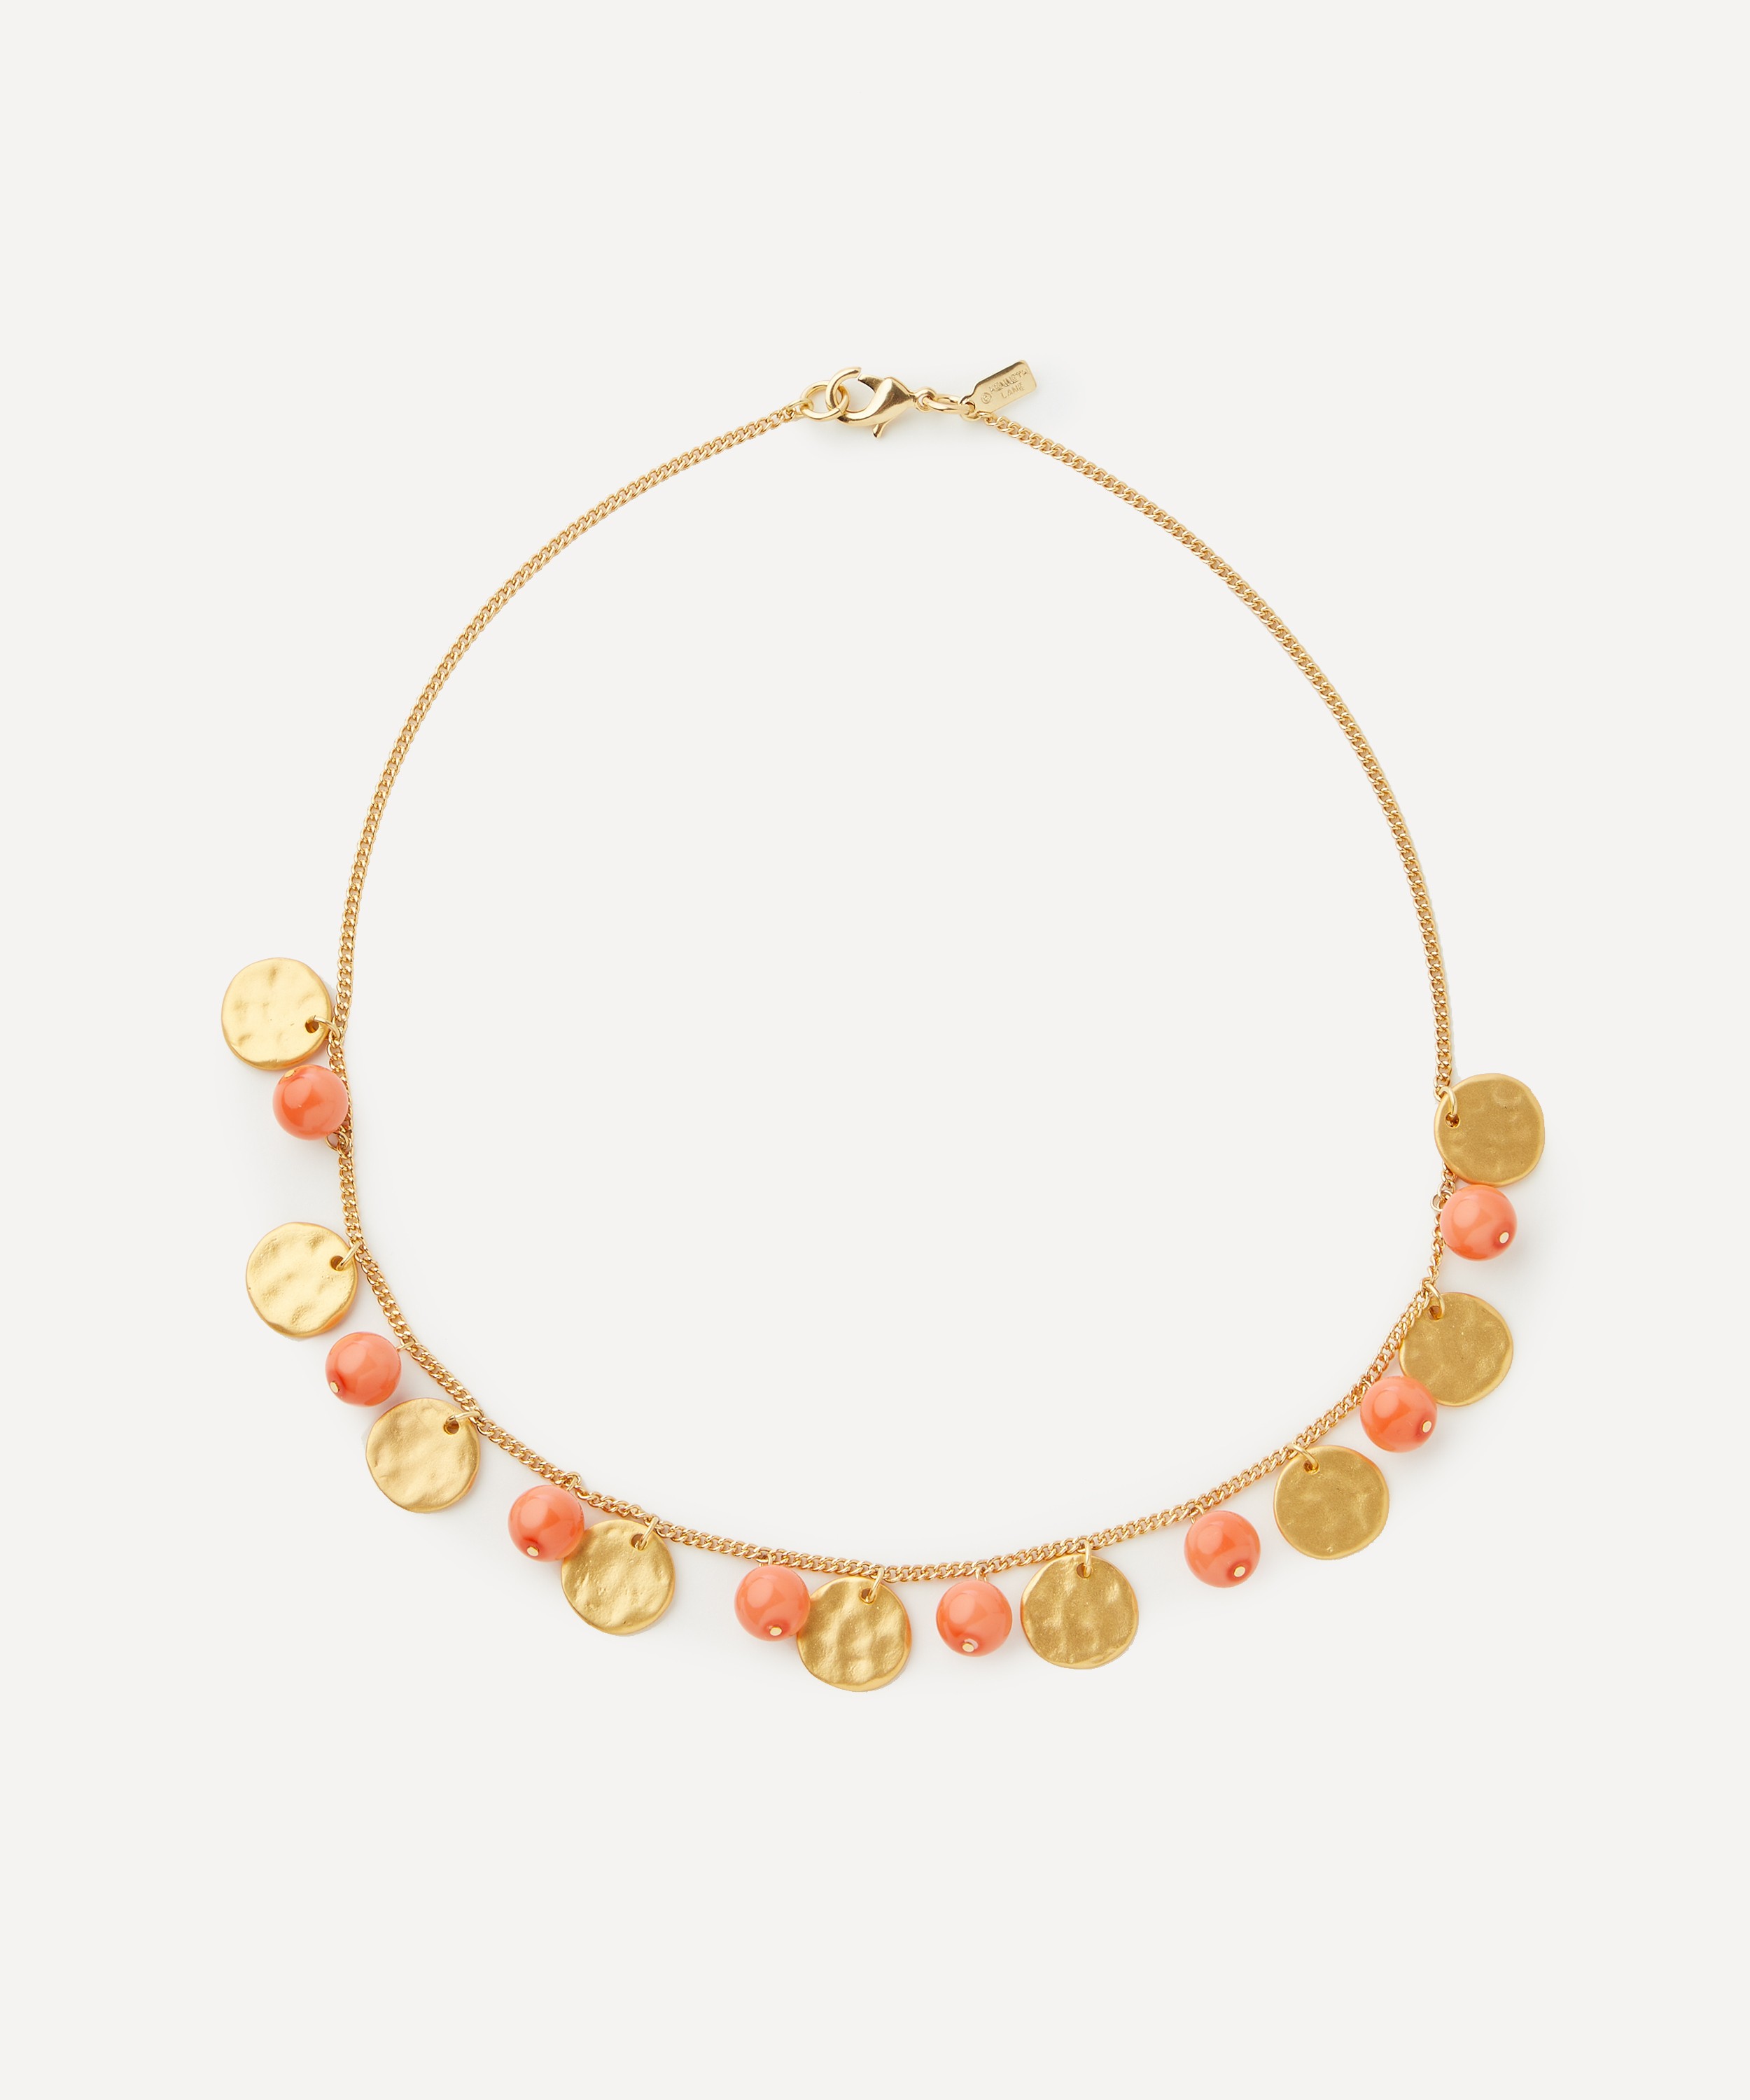 Kenneth Jay Lane - Gold-Plated Coin and Coral Drop Necklace